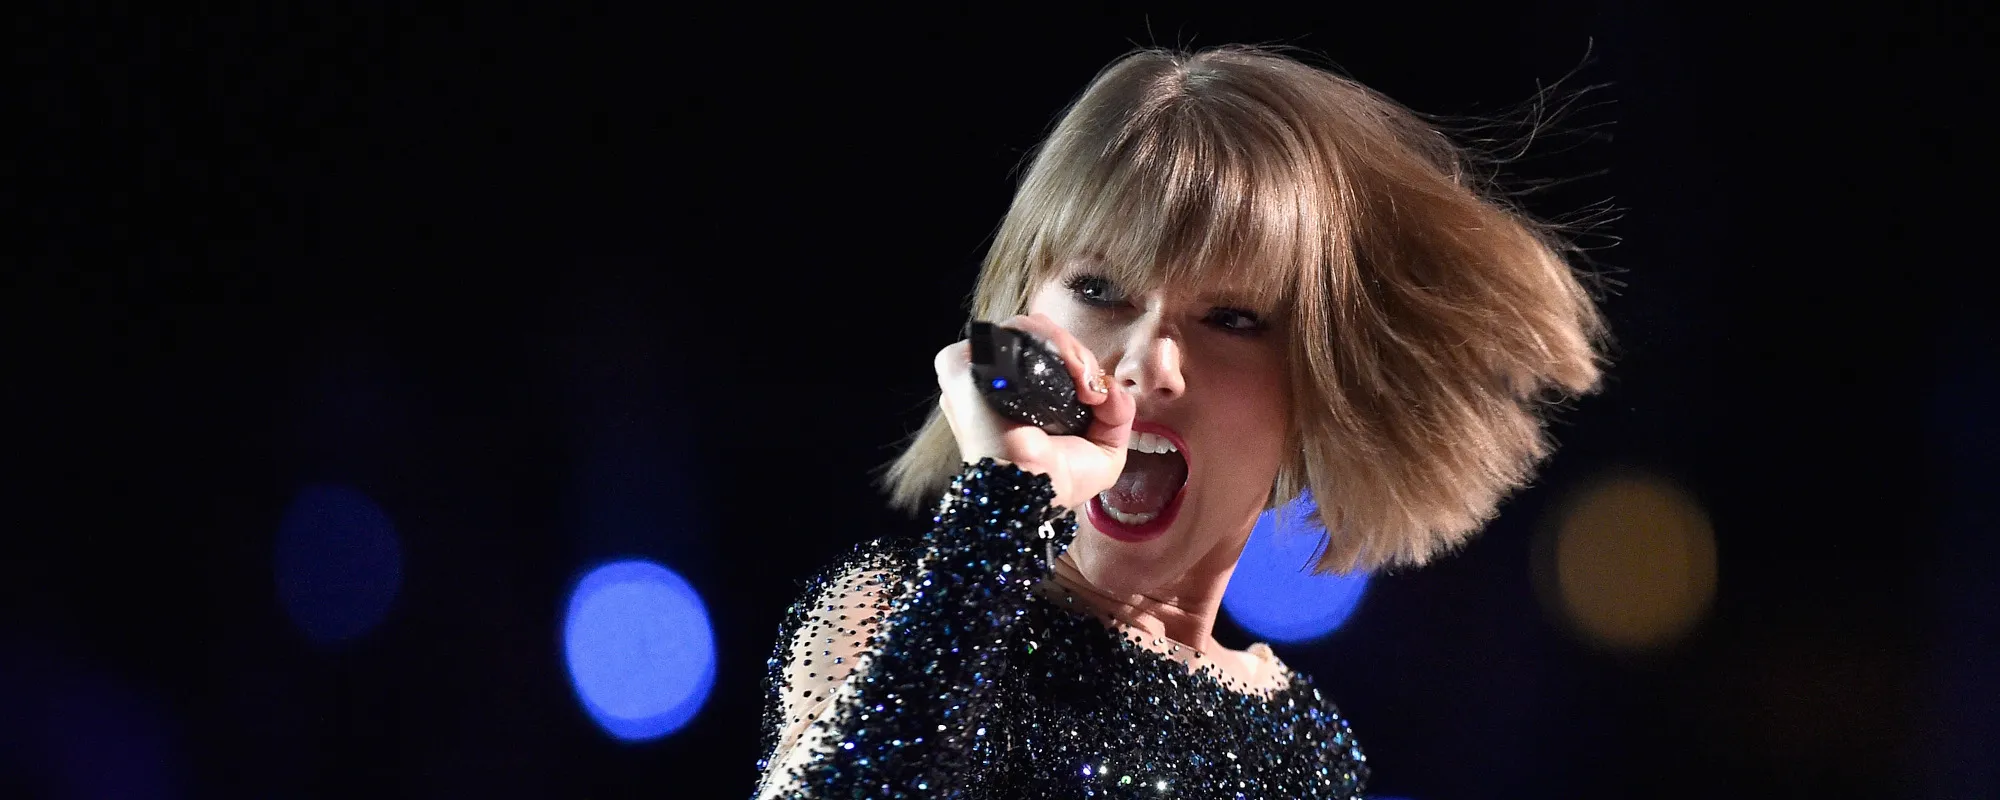 Behind the Meaning of Taylor Swift’s Revenge Anthem “Look What You Made Me Do”